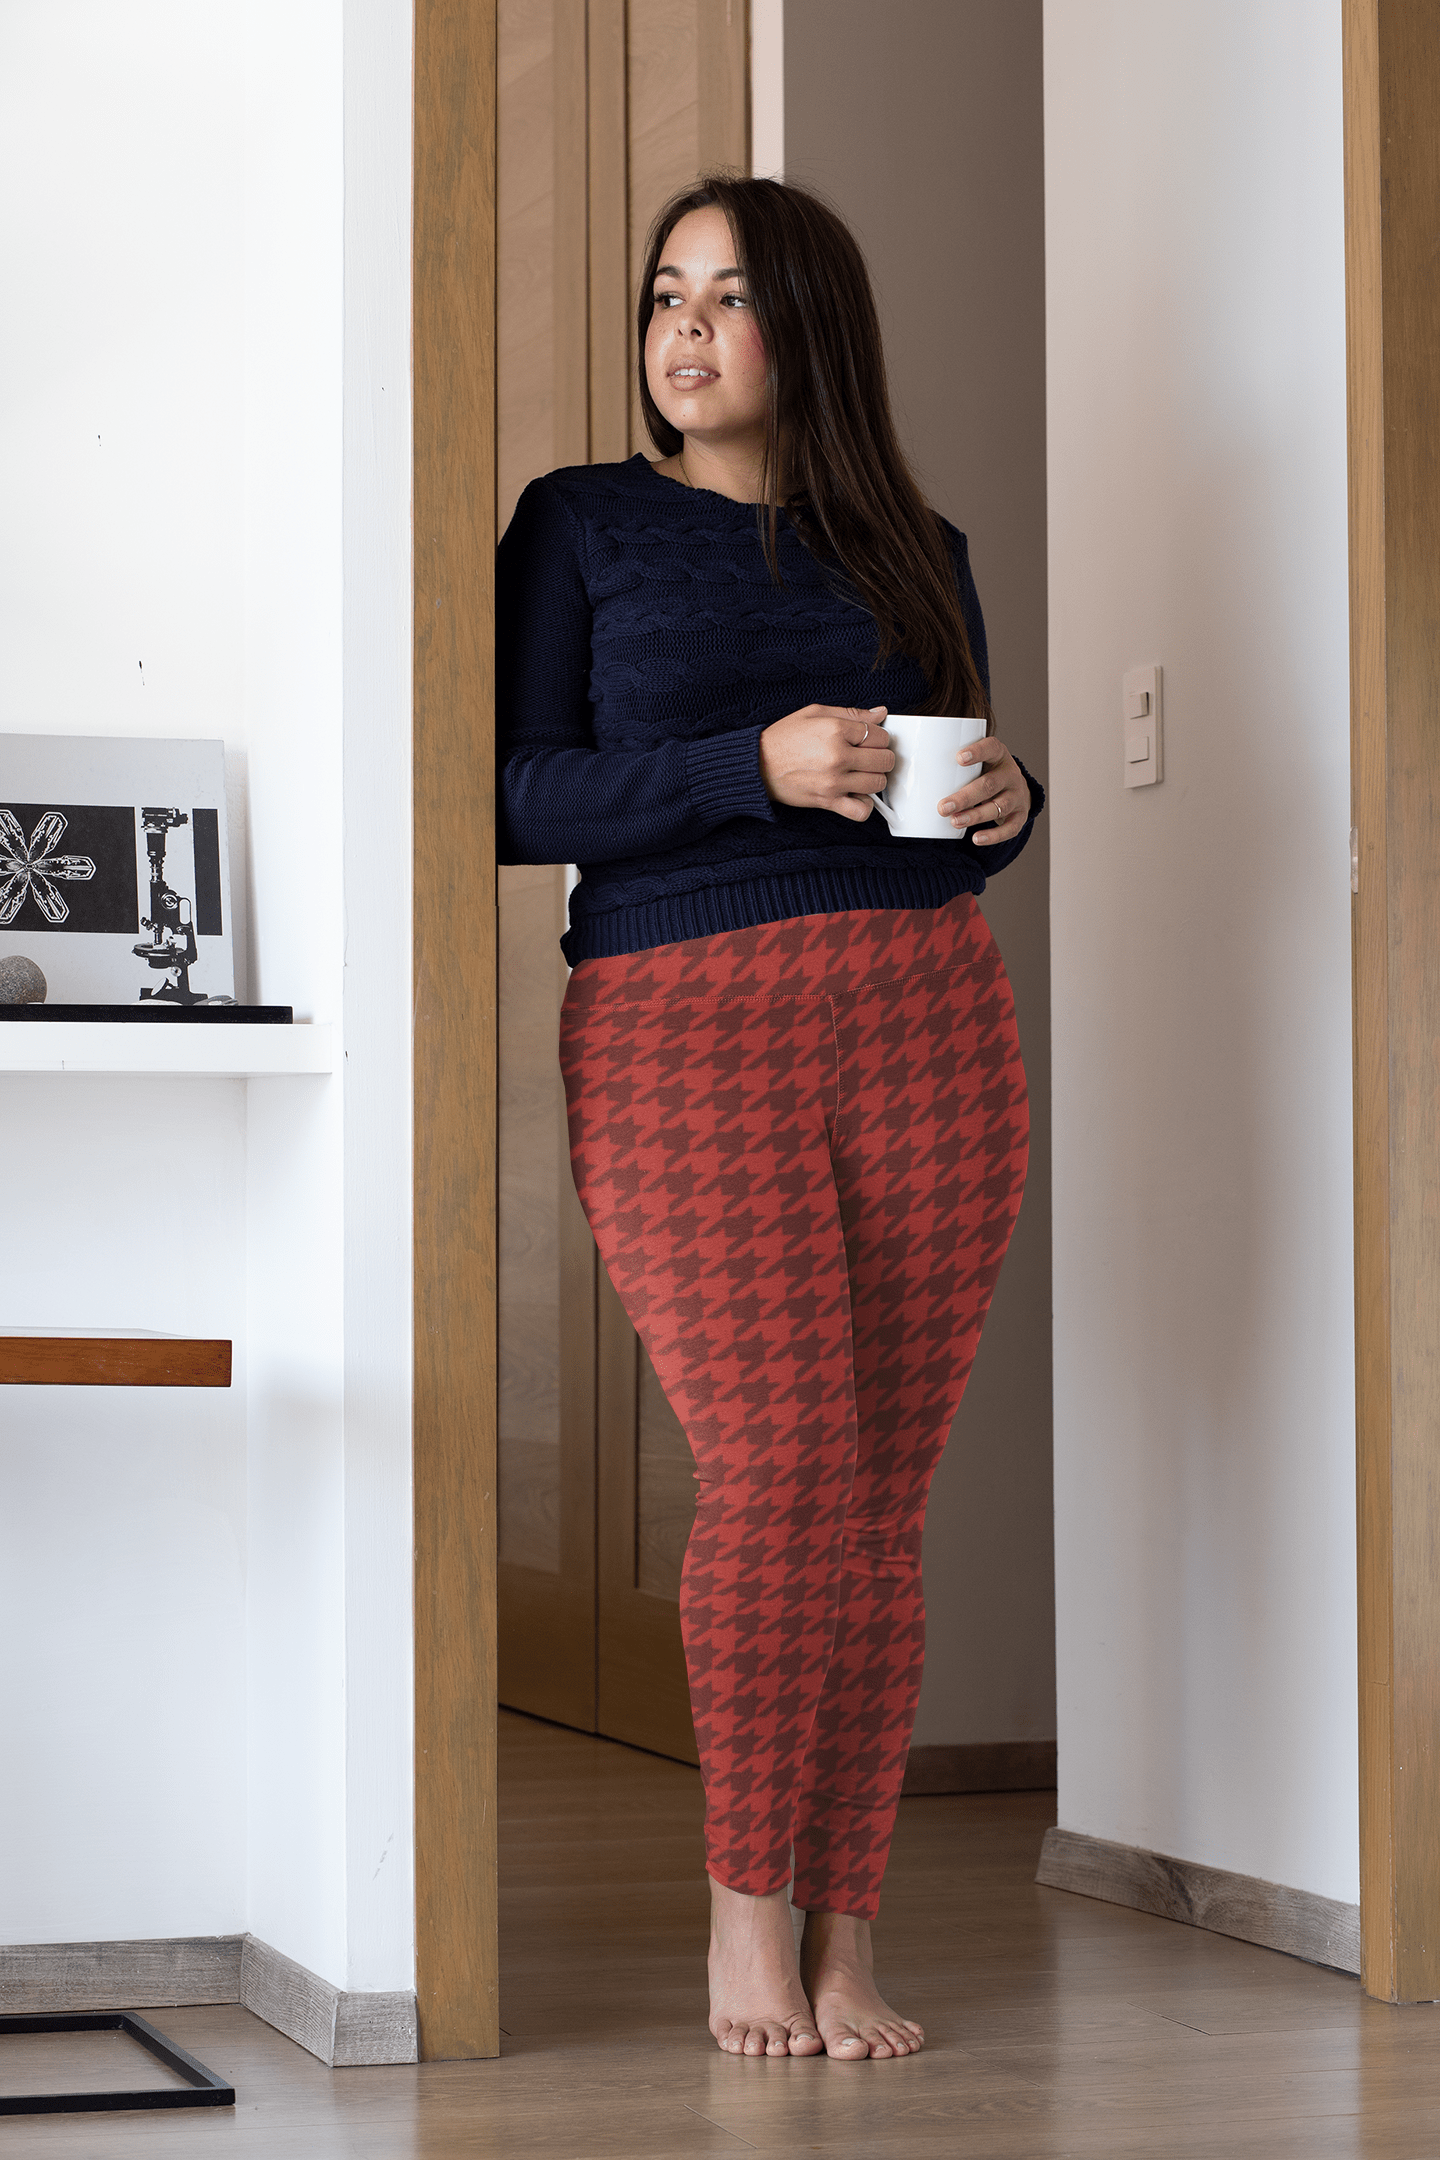 Size Inclusive Leggings with pockets in red houndstooth - familiar...yet different